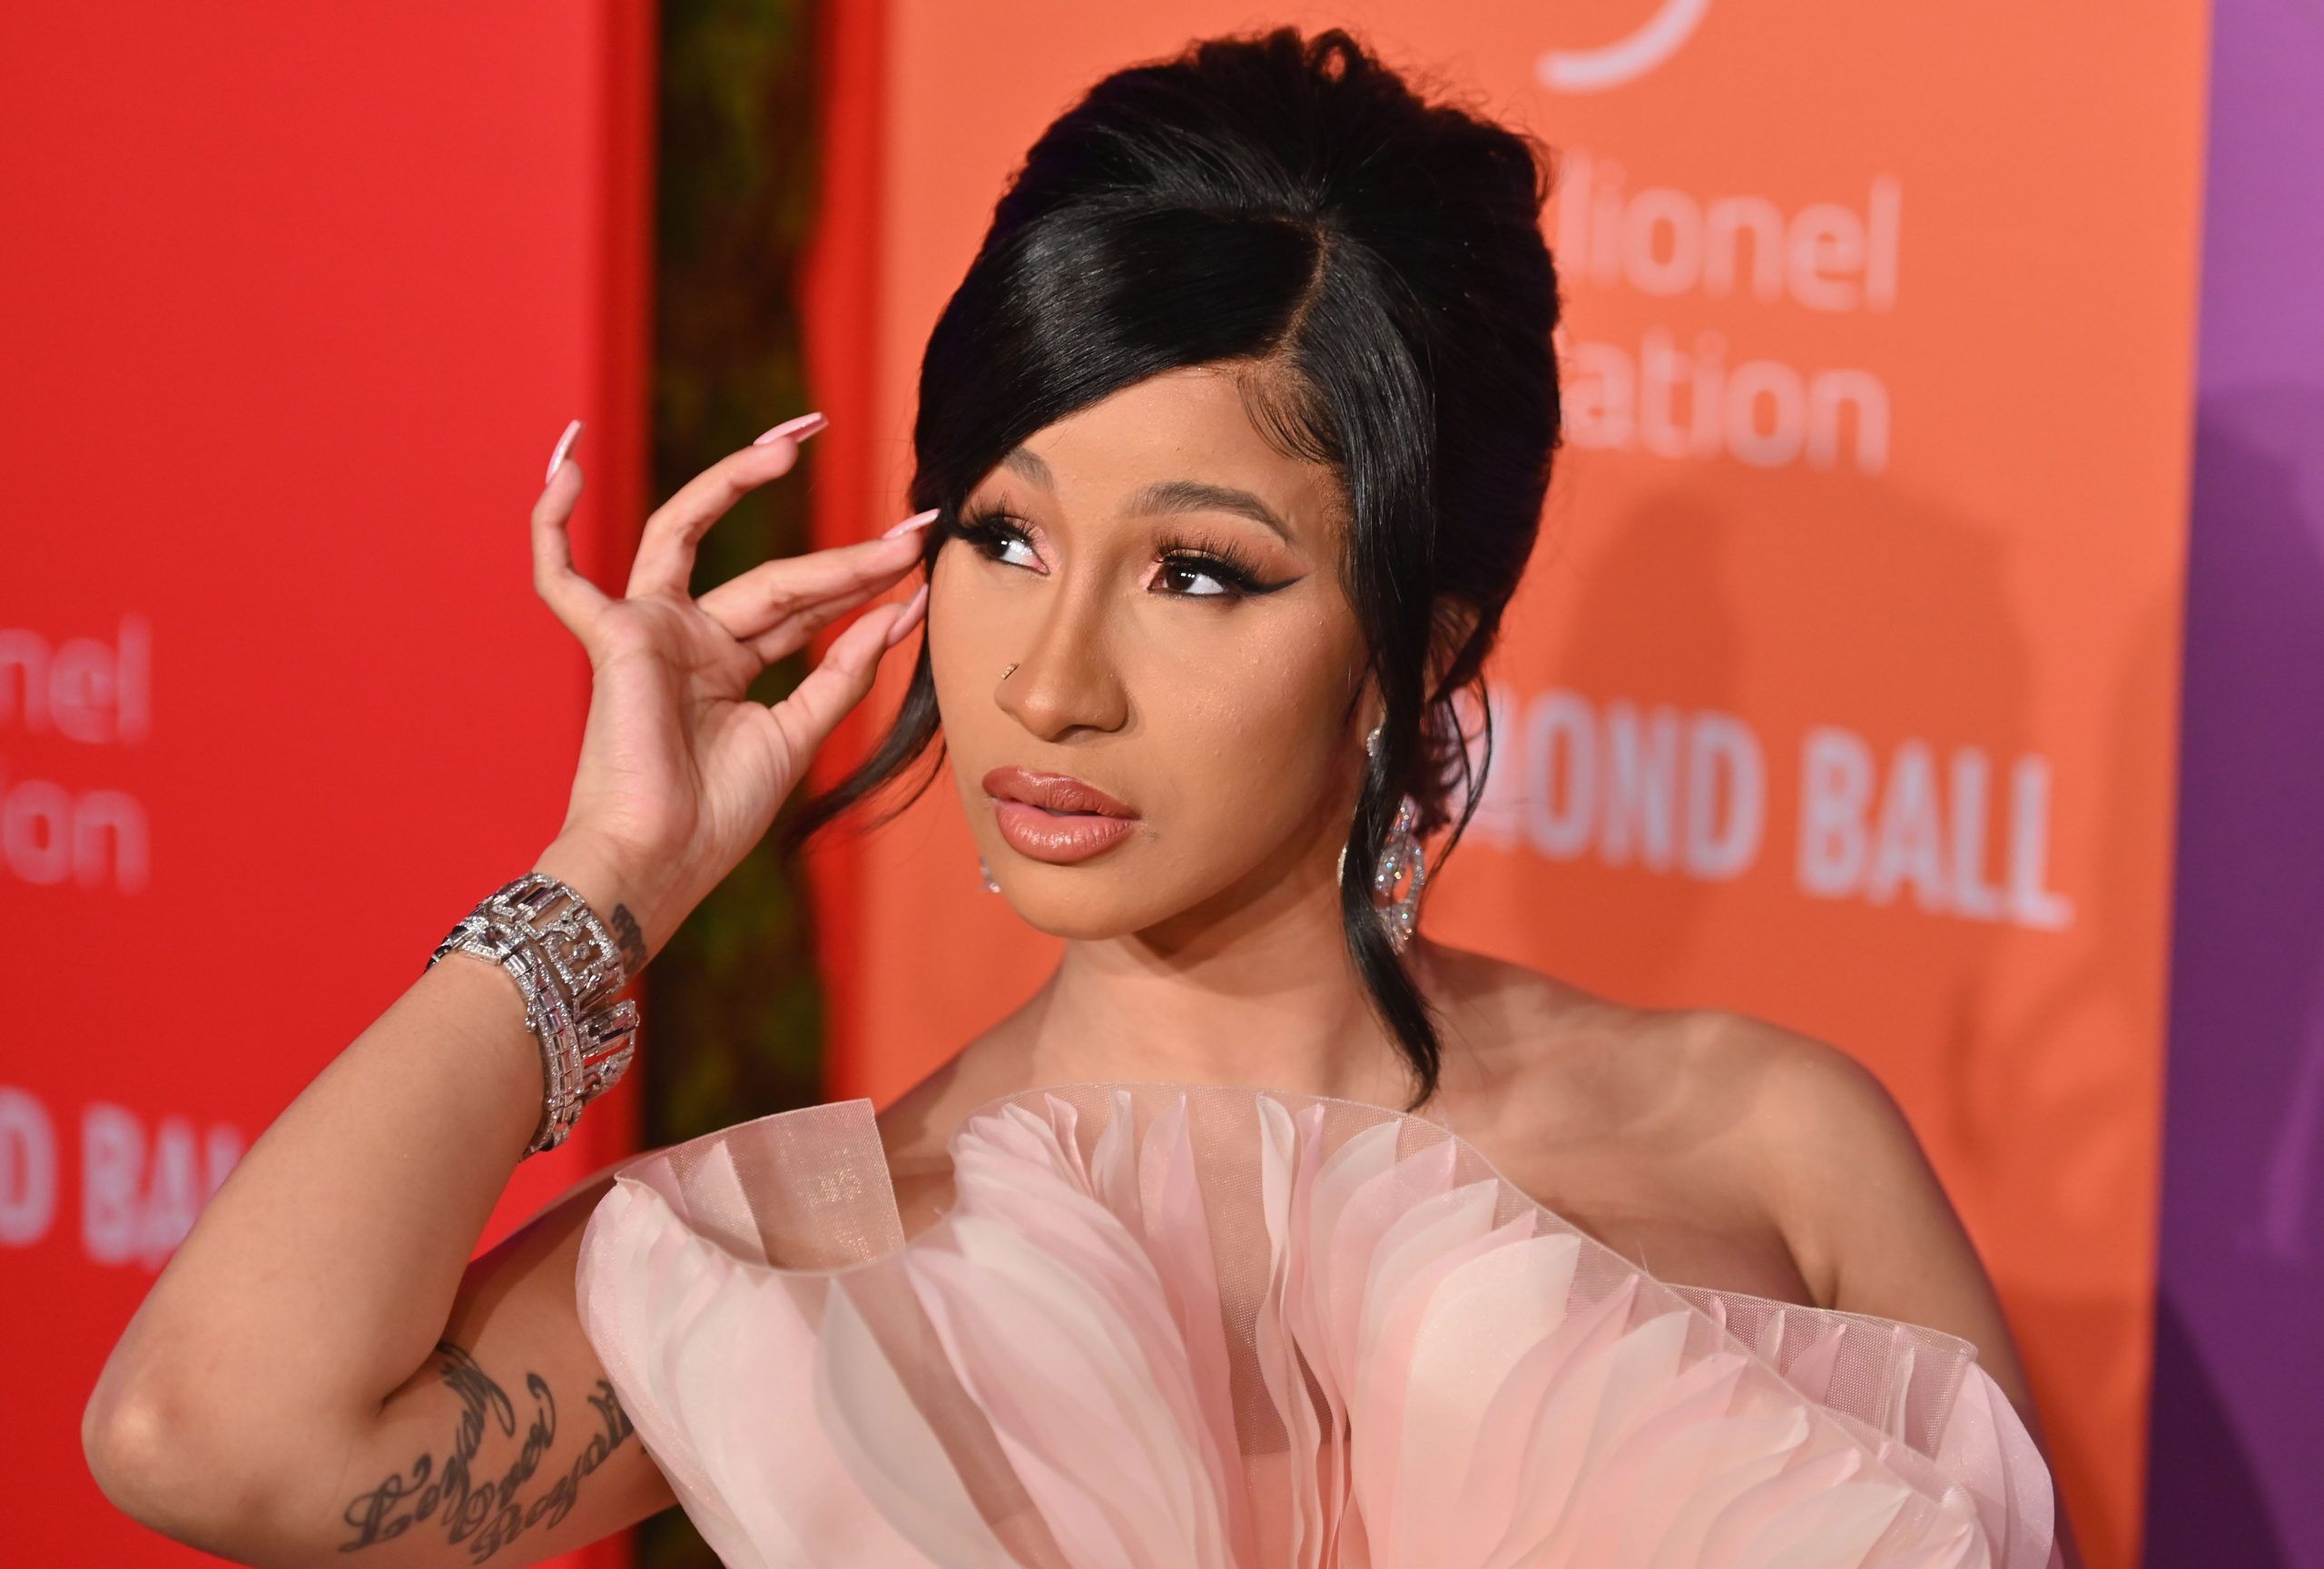 US rapper Cardi B arrives for Rihanna's 5th Annual Diamond Ball Benefitting The Clara Lionel Foundation at Cipriani Wall Street on September 12, 2019 in New York City.